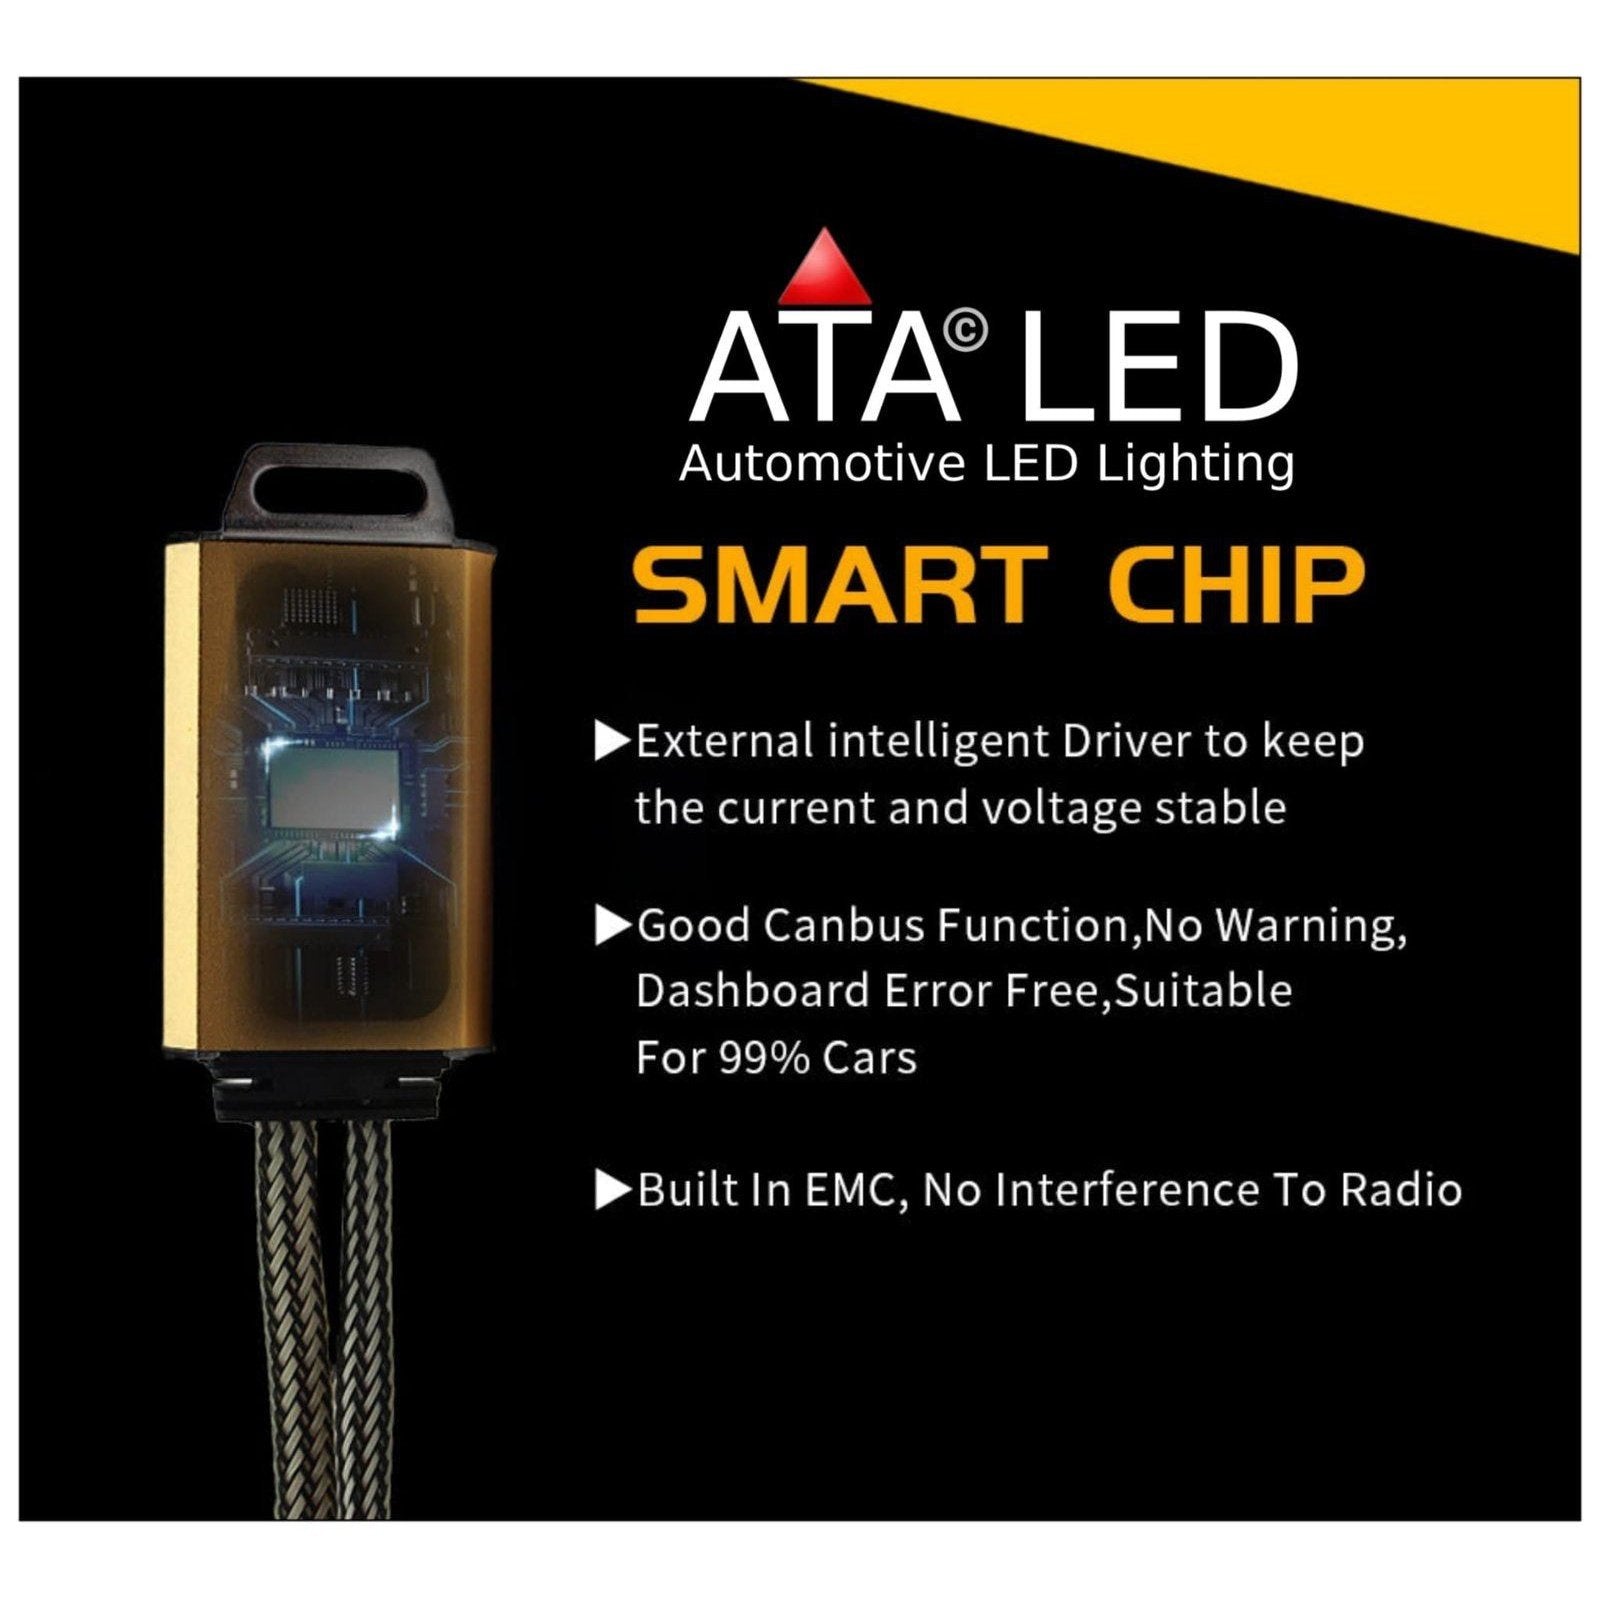 Smart Chip External intelligent driver to keep the current and voltage stable Good canbus function no warning dashboard error free suitable for 99% cars Built in EMC No Interference to Radio 